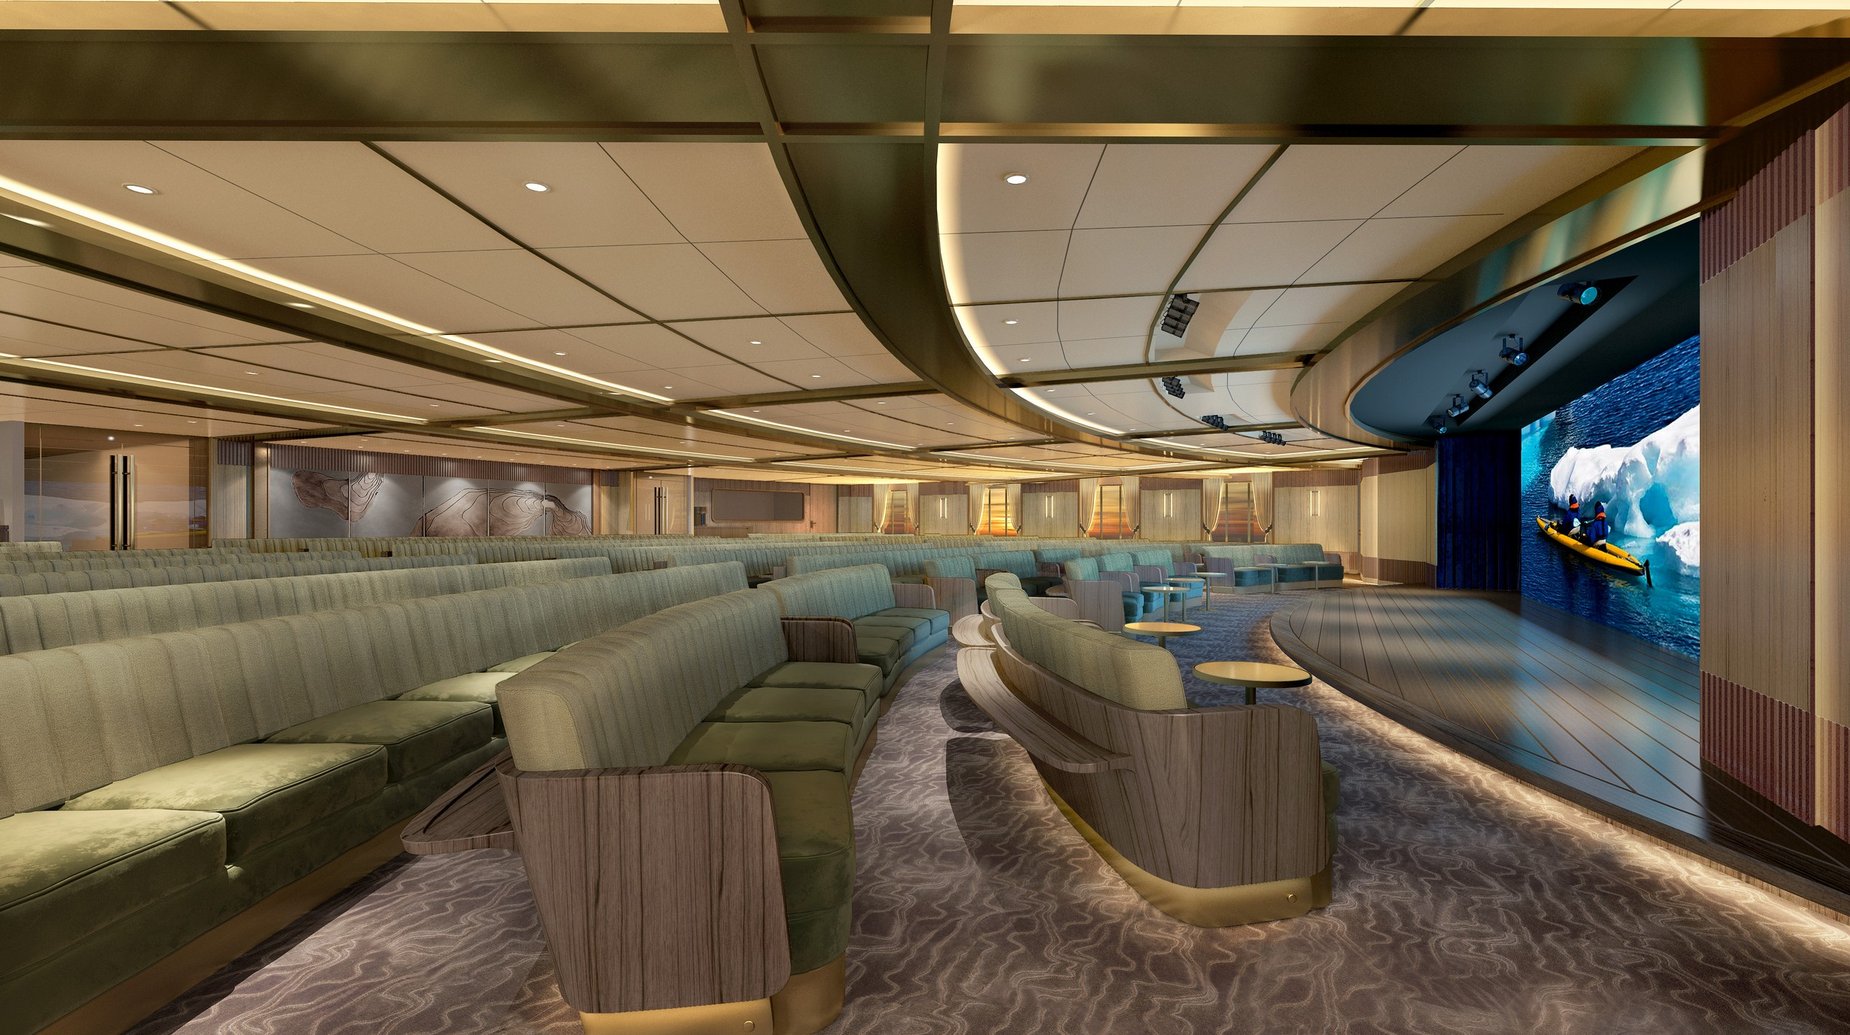 Seabourn expedition ships - Discovery Center rendering_07 16 19